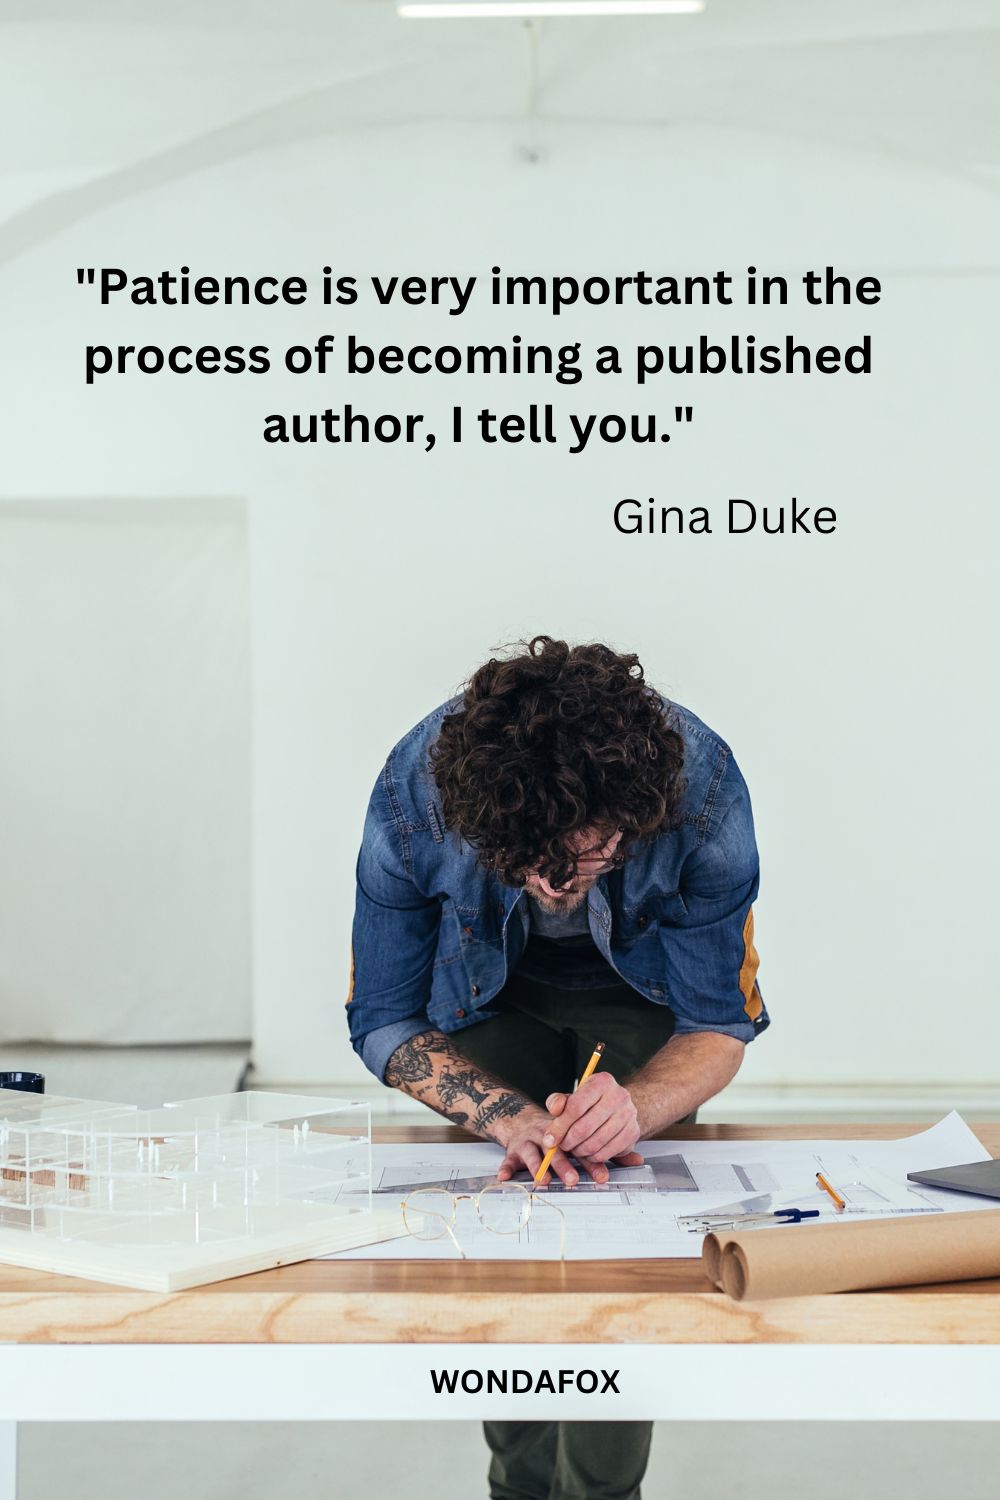 "Patience is very important in the process of becoming a published author, I tell you."
Gina Duke